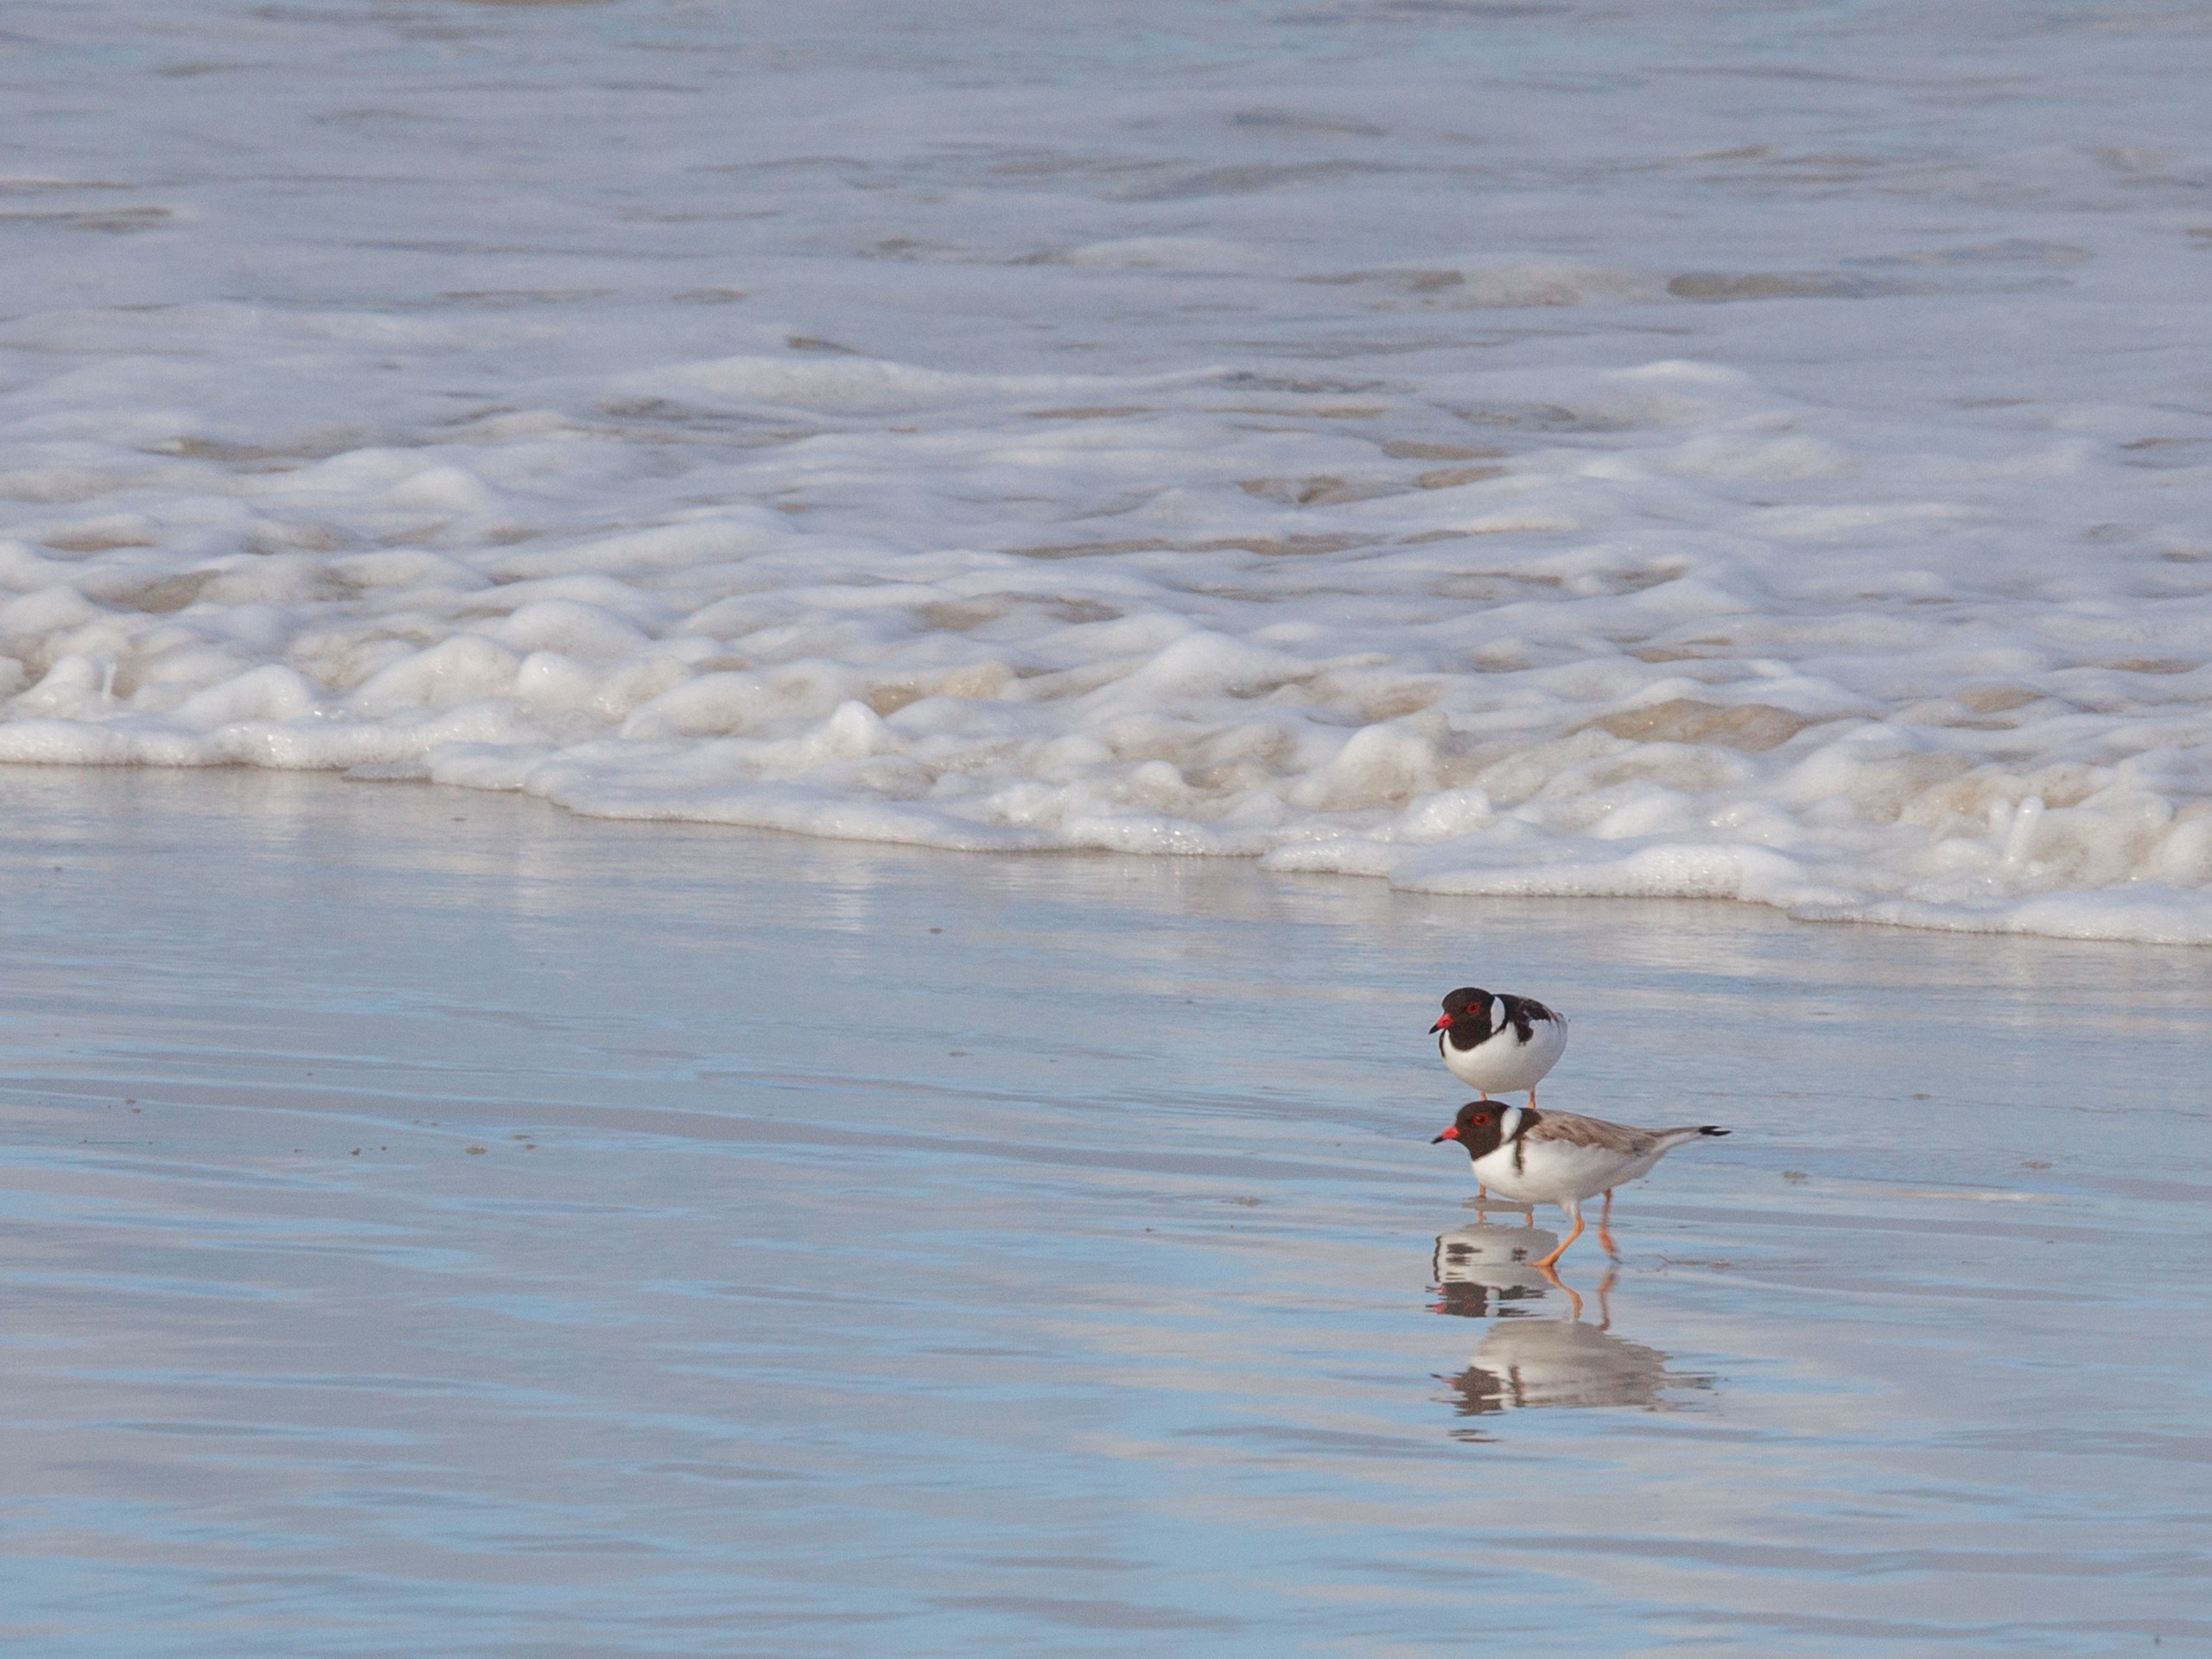 Hooded Plovers enjoying the water of the Cofin Bay